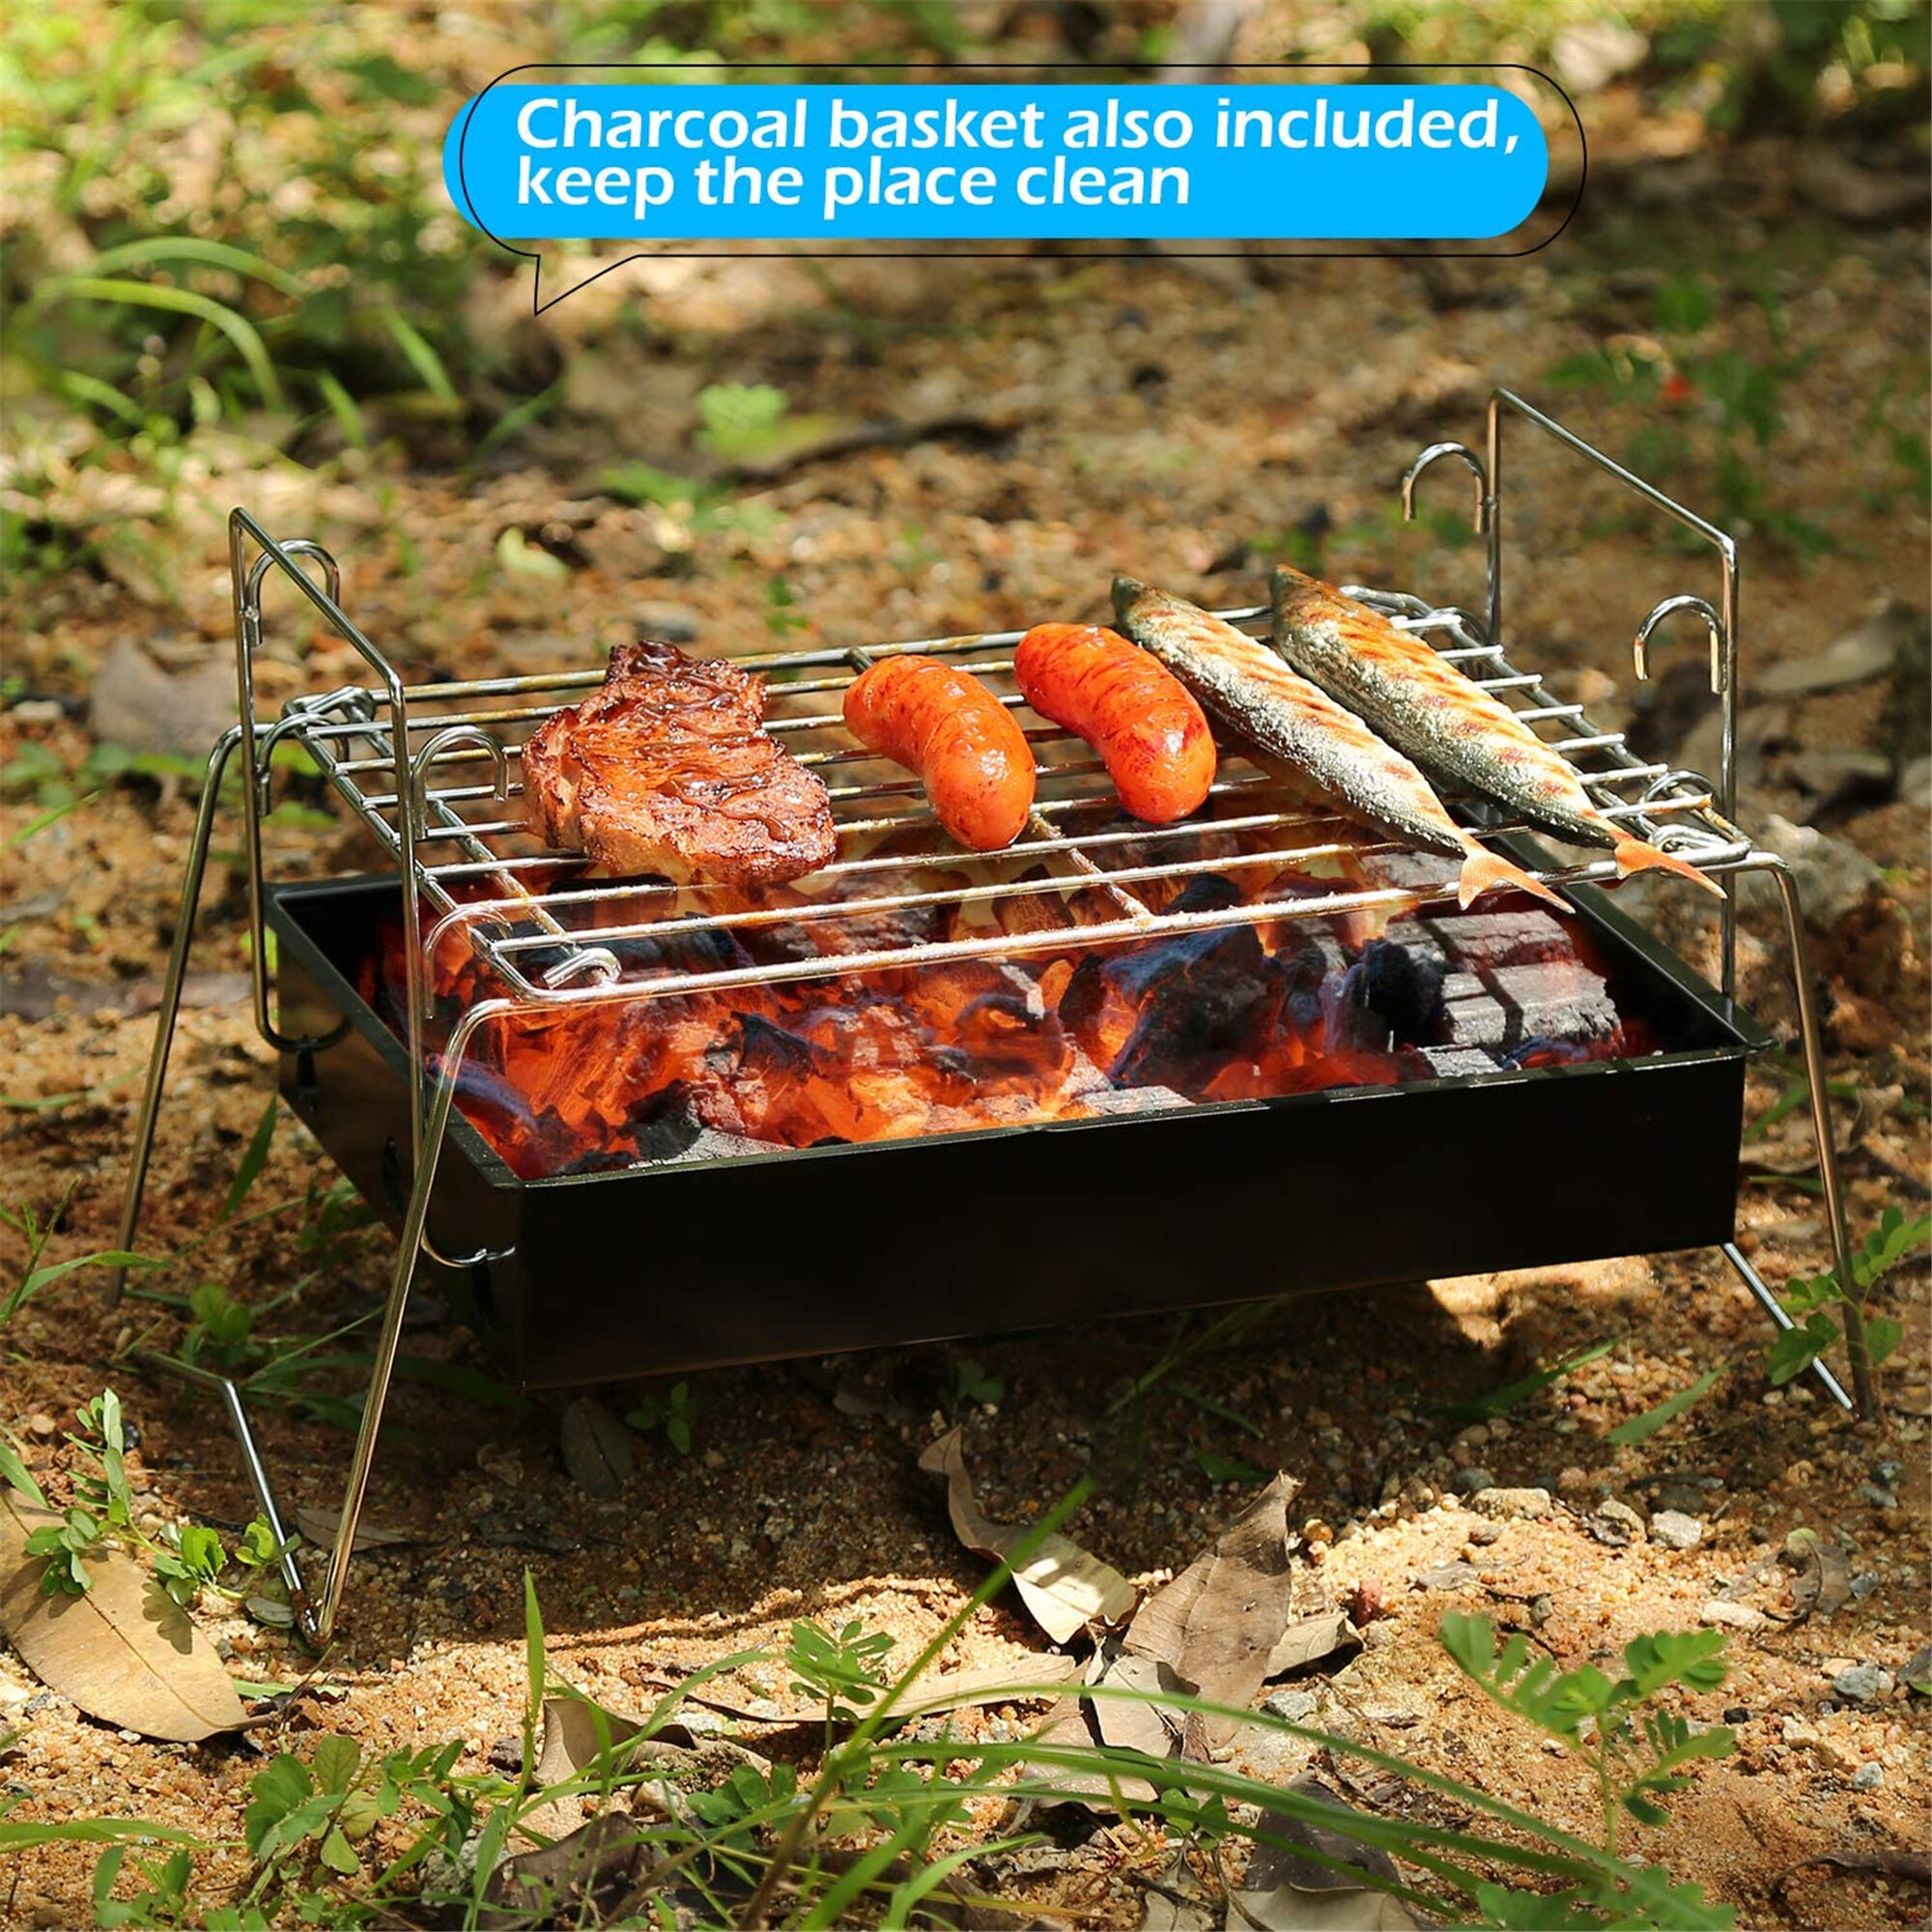 BBQ CHOICE Rubber Handle/Stainless Steel Mesh Barbecue Grilling Basket